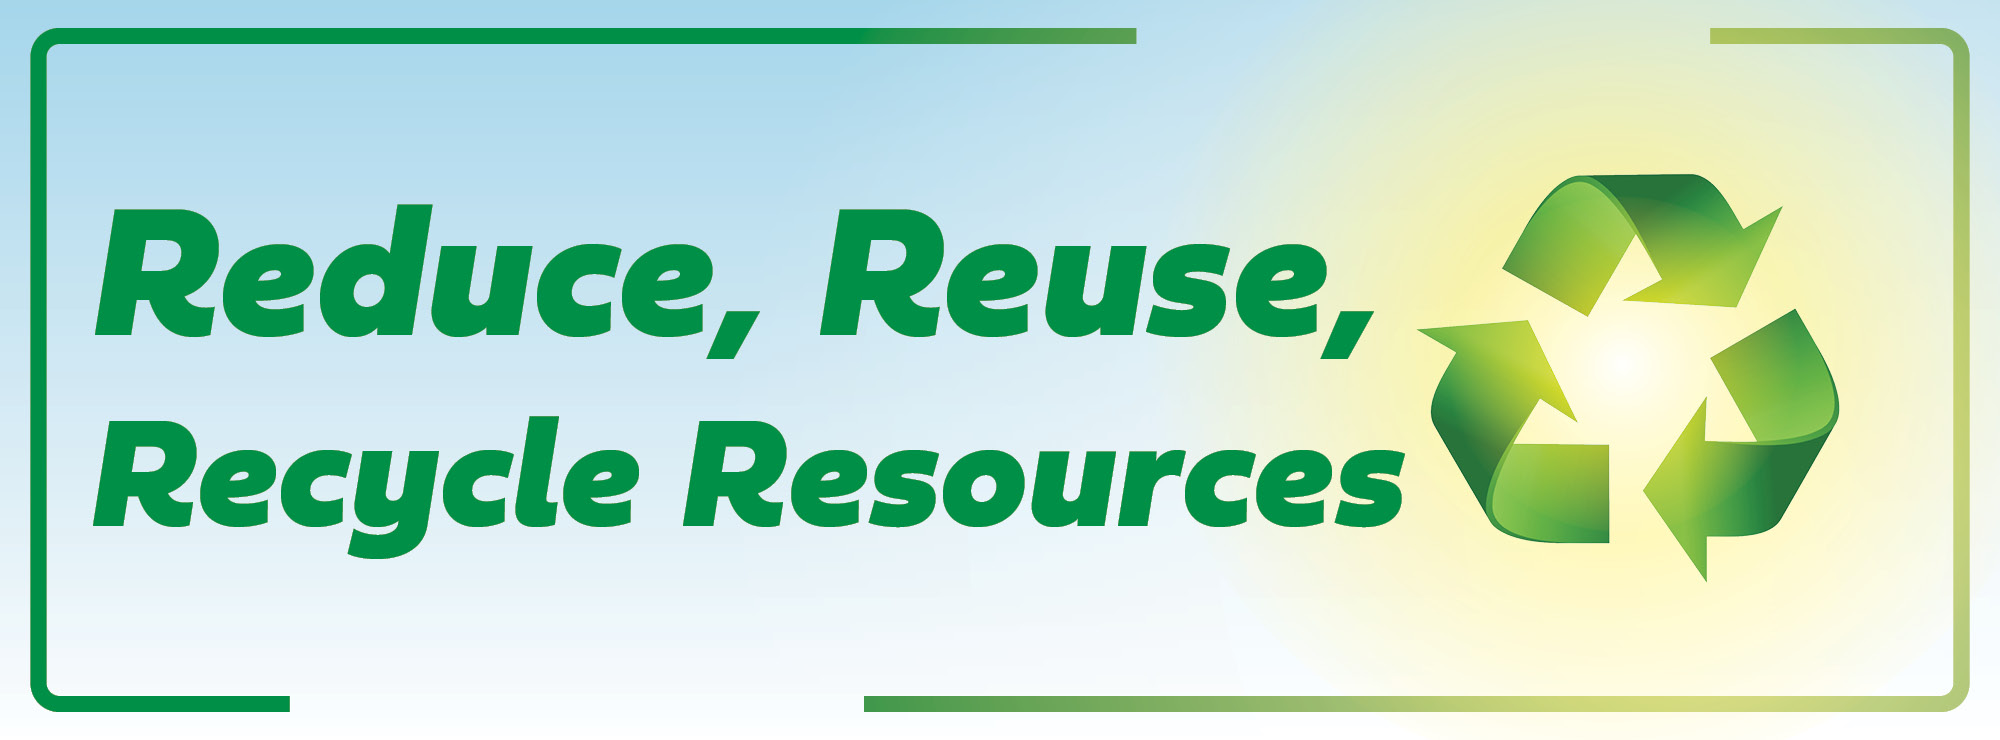 Reduce, Reuse, Recycle Resources